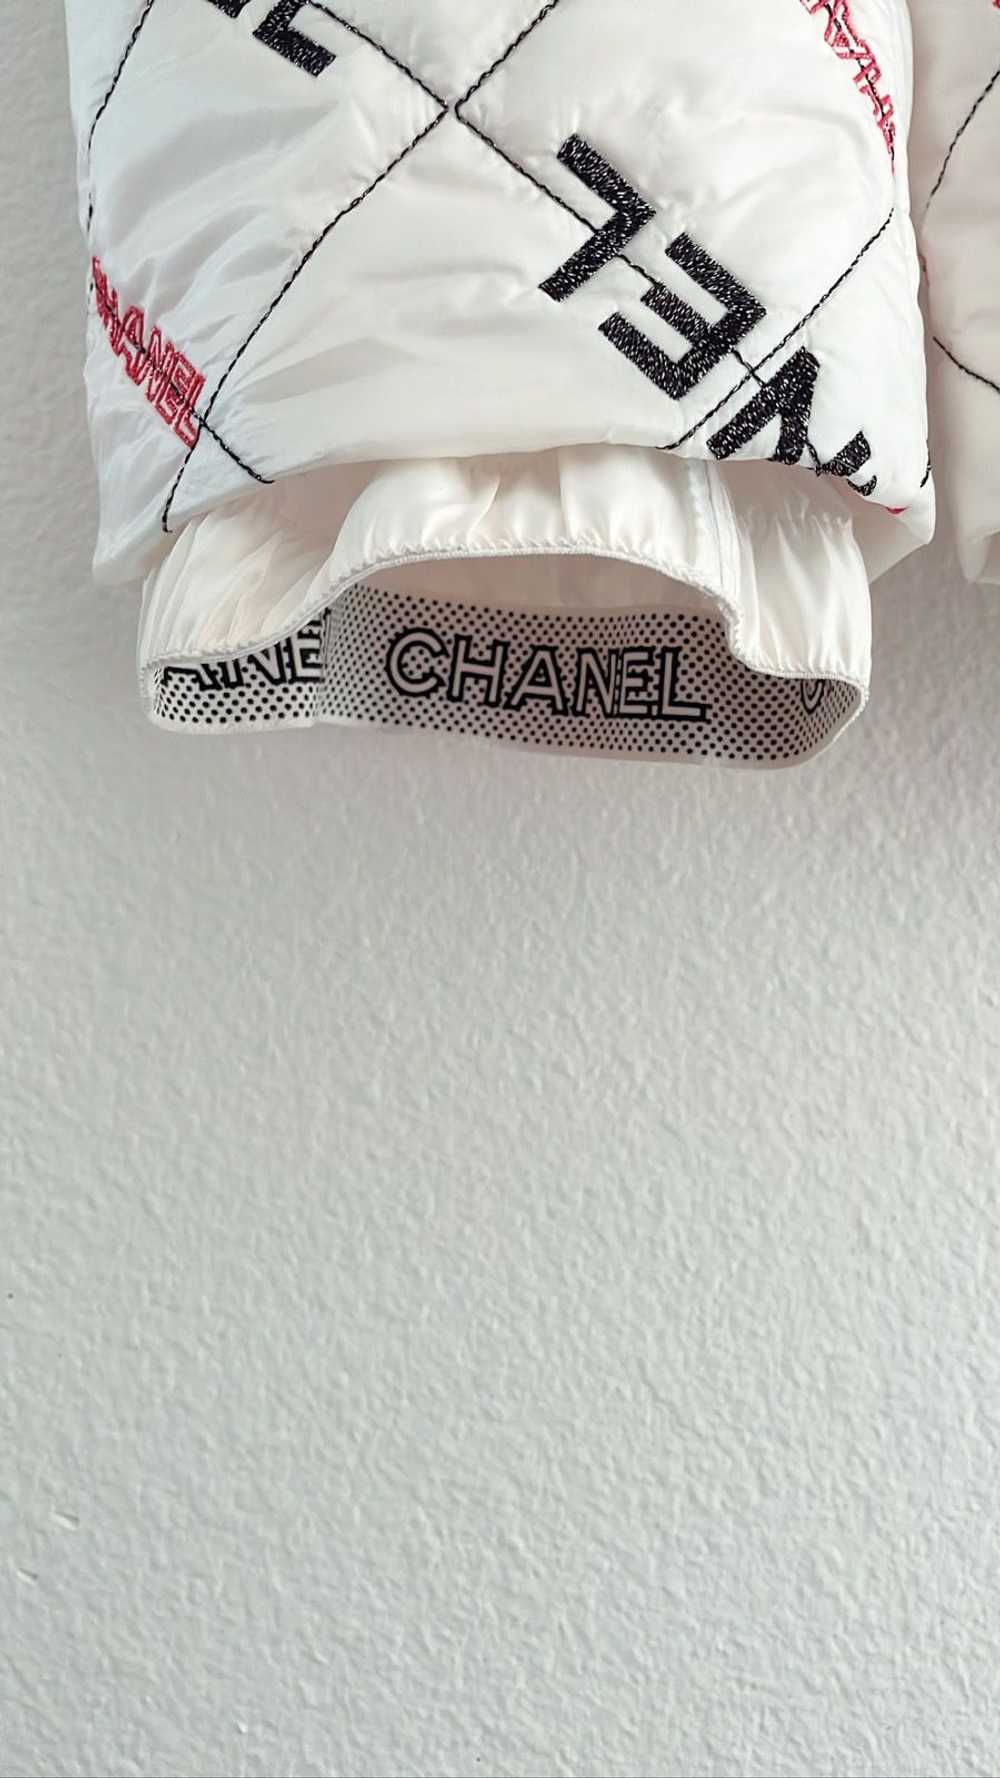 Chanel Chanel Logo Quilted Ski Jumpsuit - image 11